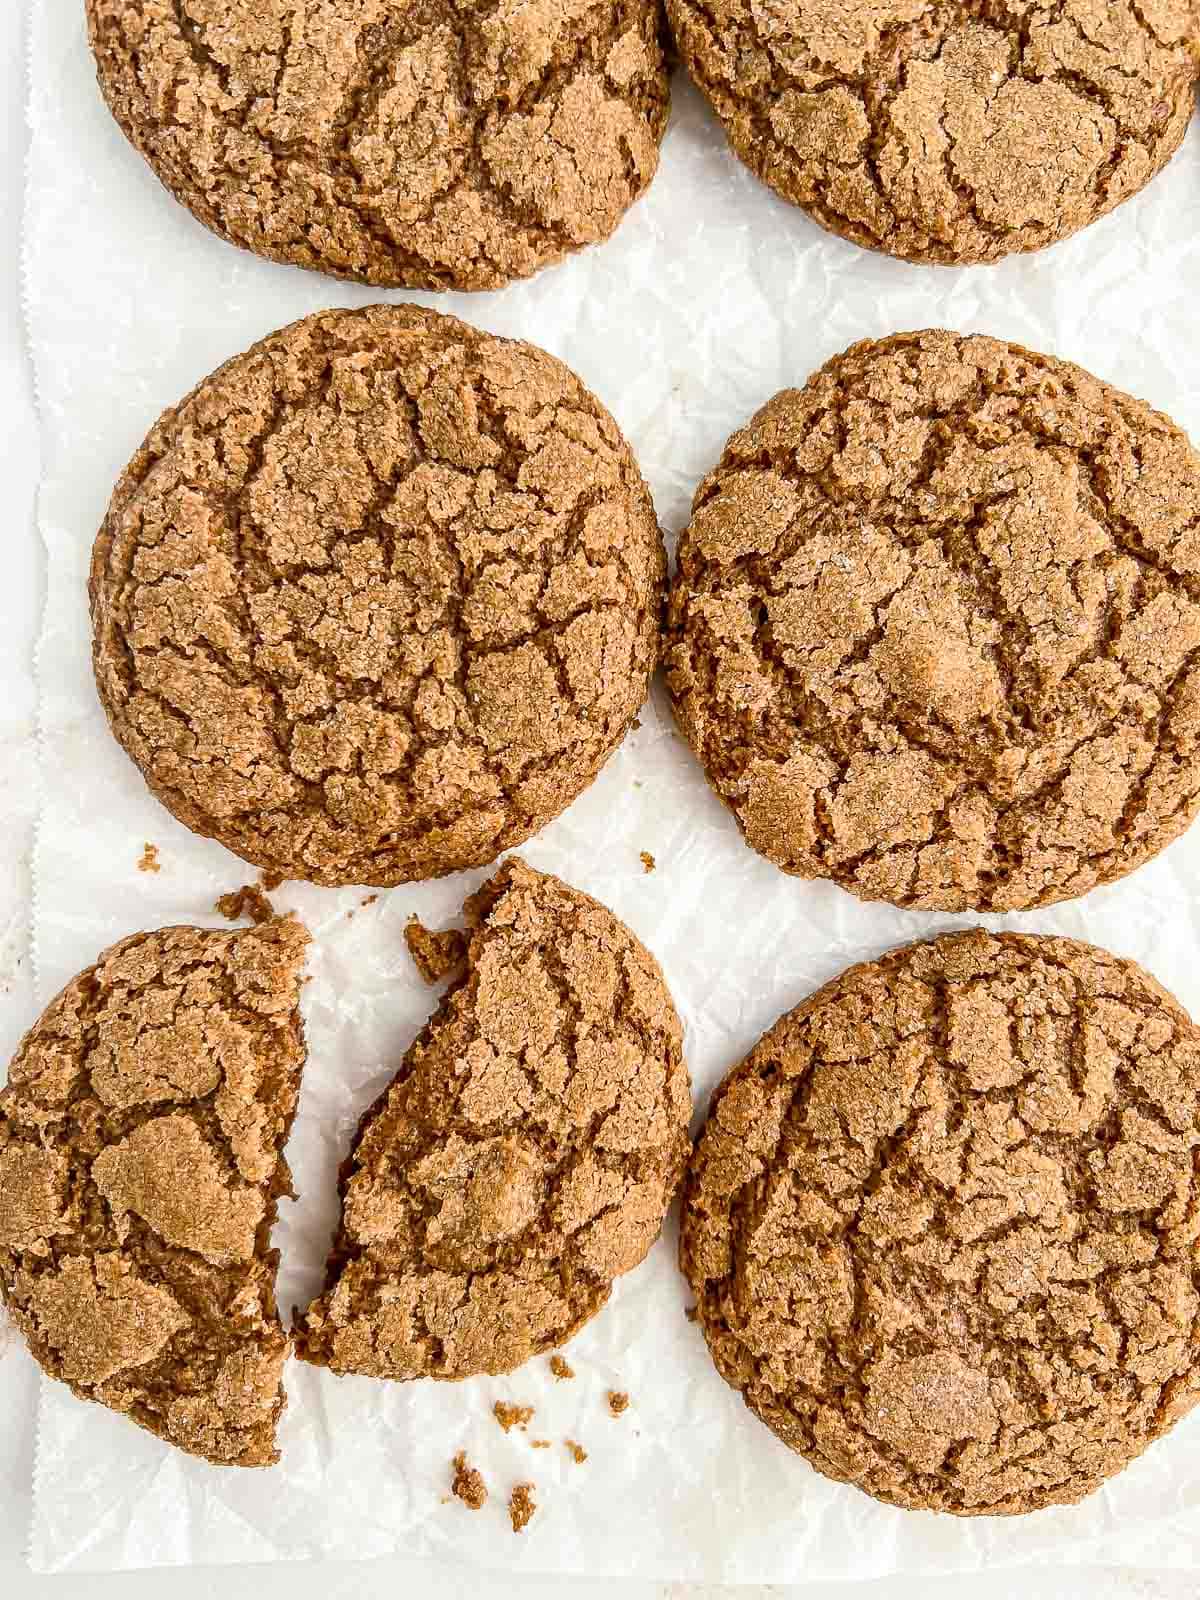 Vegan gingersnaps neatly lined up with one gingersnap broken in half.